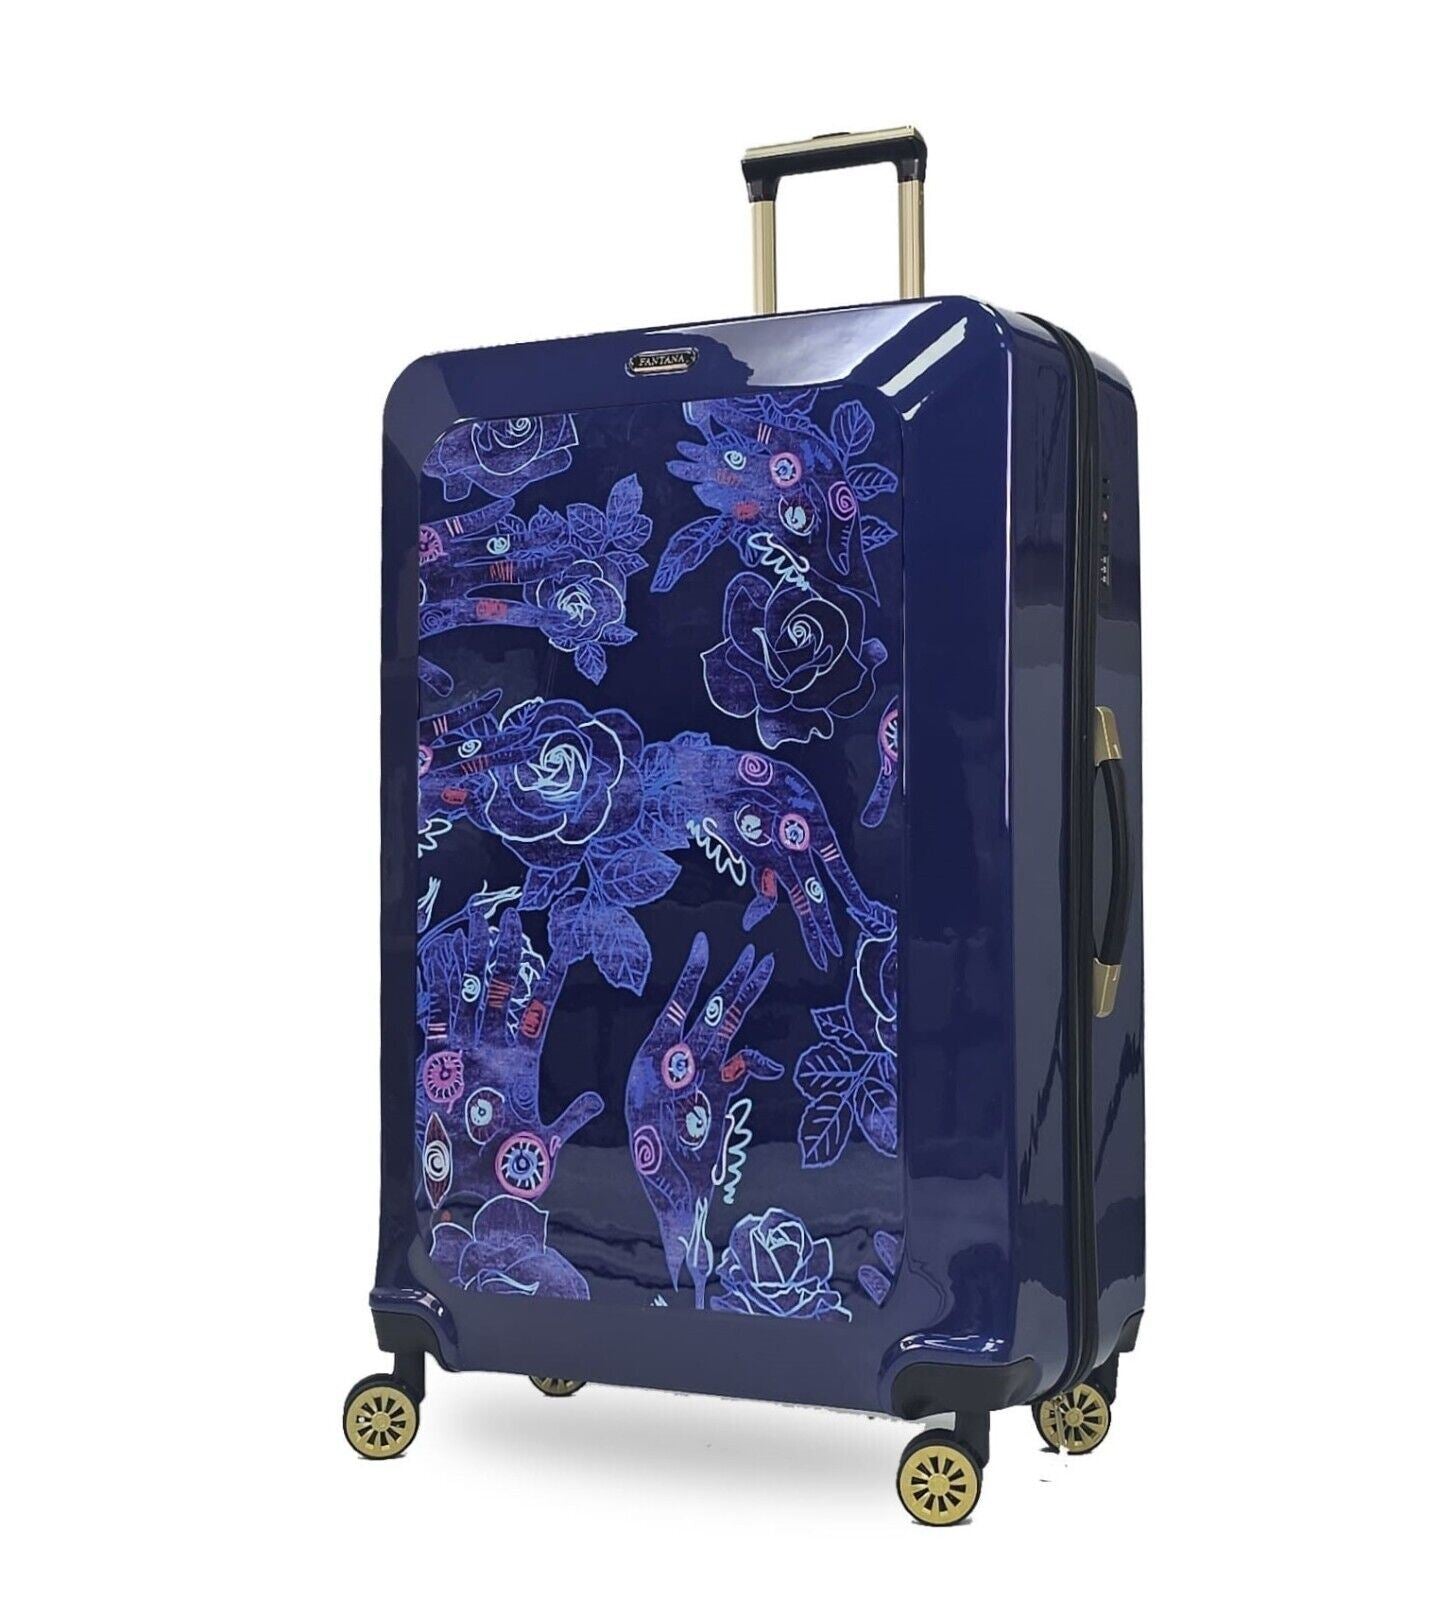 Butler Extra Large Hard Shell Suitcase in Blue